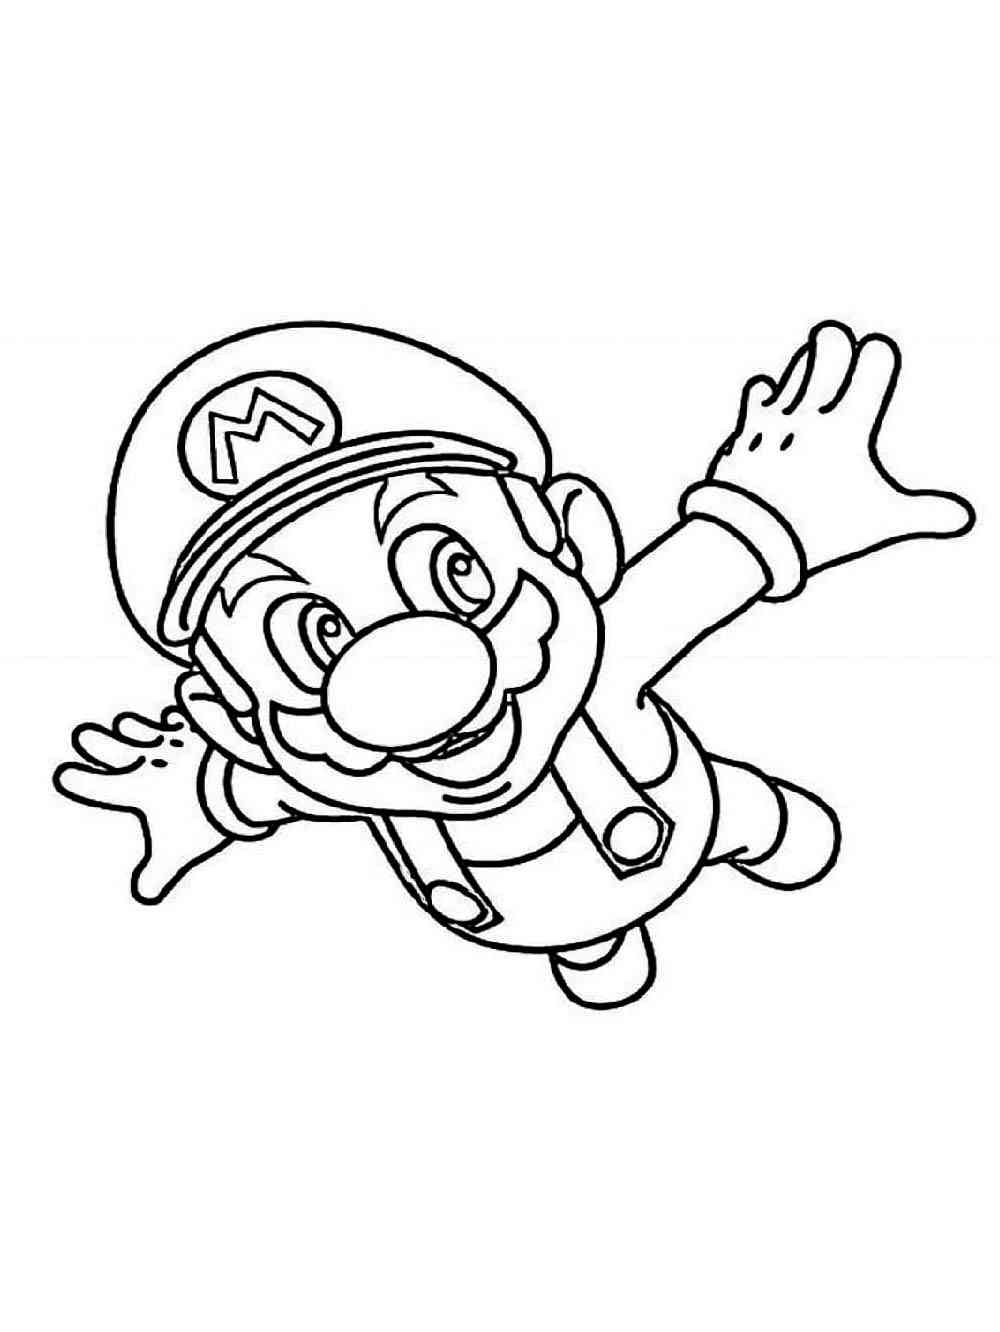 smash brothers characters coloring pages